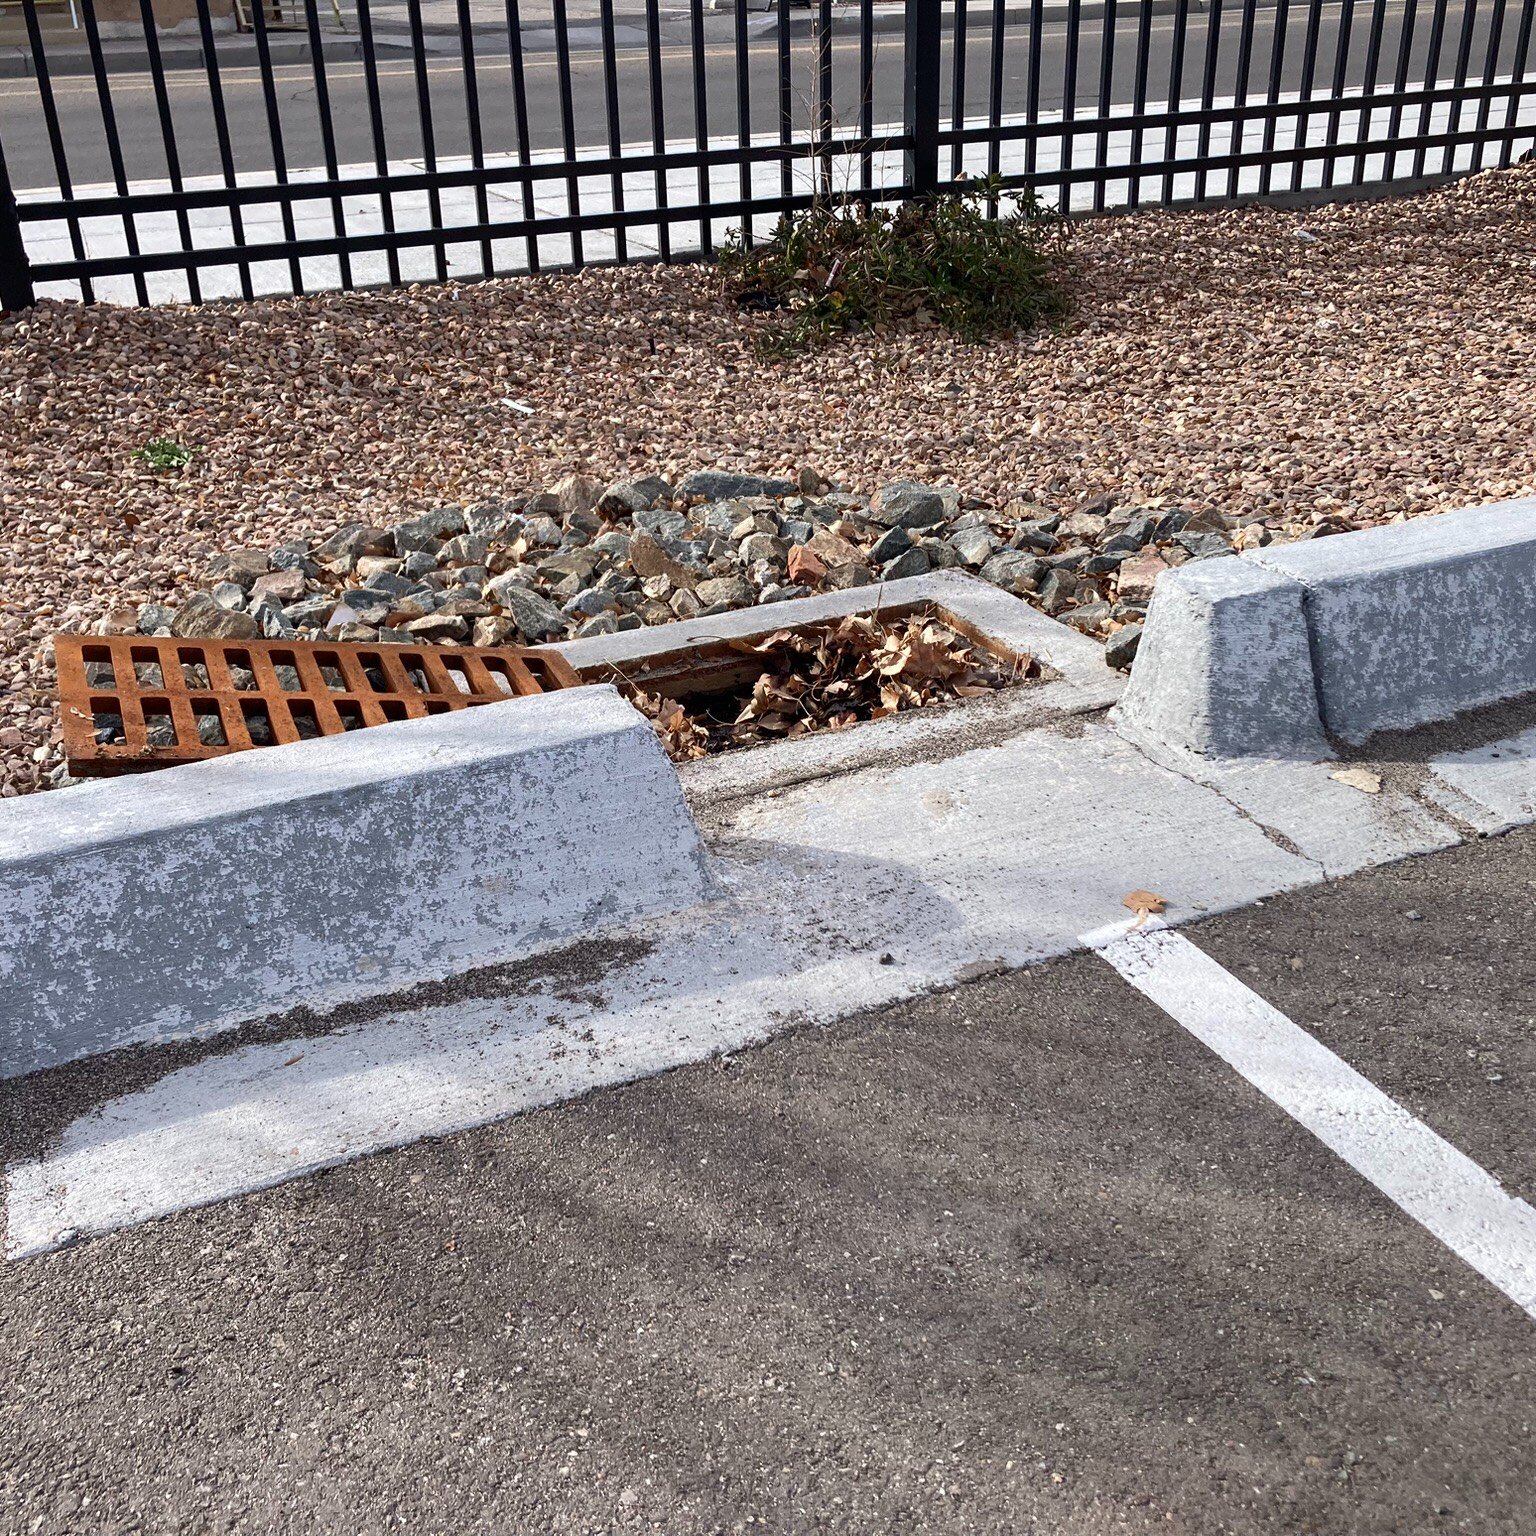 I know, I know. A curb cut and a mucky concrete box for today&rsquo;s post? NOPE! It&rsquo;s a sediment trap &ndash; the underrated workhorse of many green stormwater infrastructure (GSI) landscapes in the urban environment. That silt, debris, litter